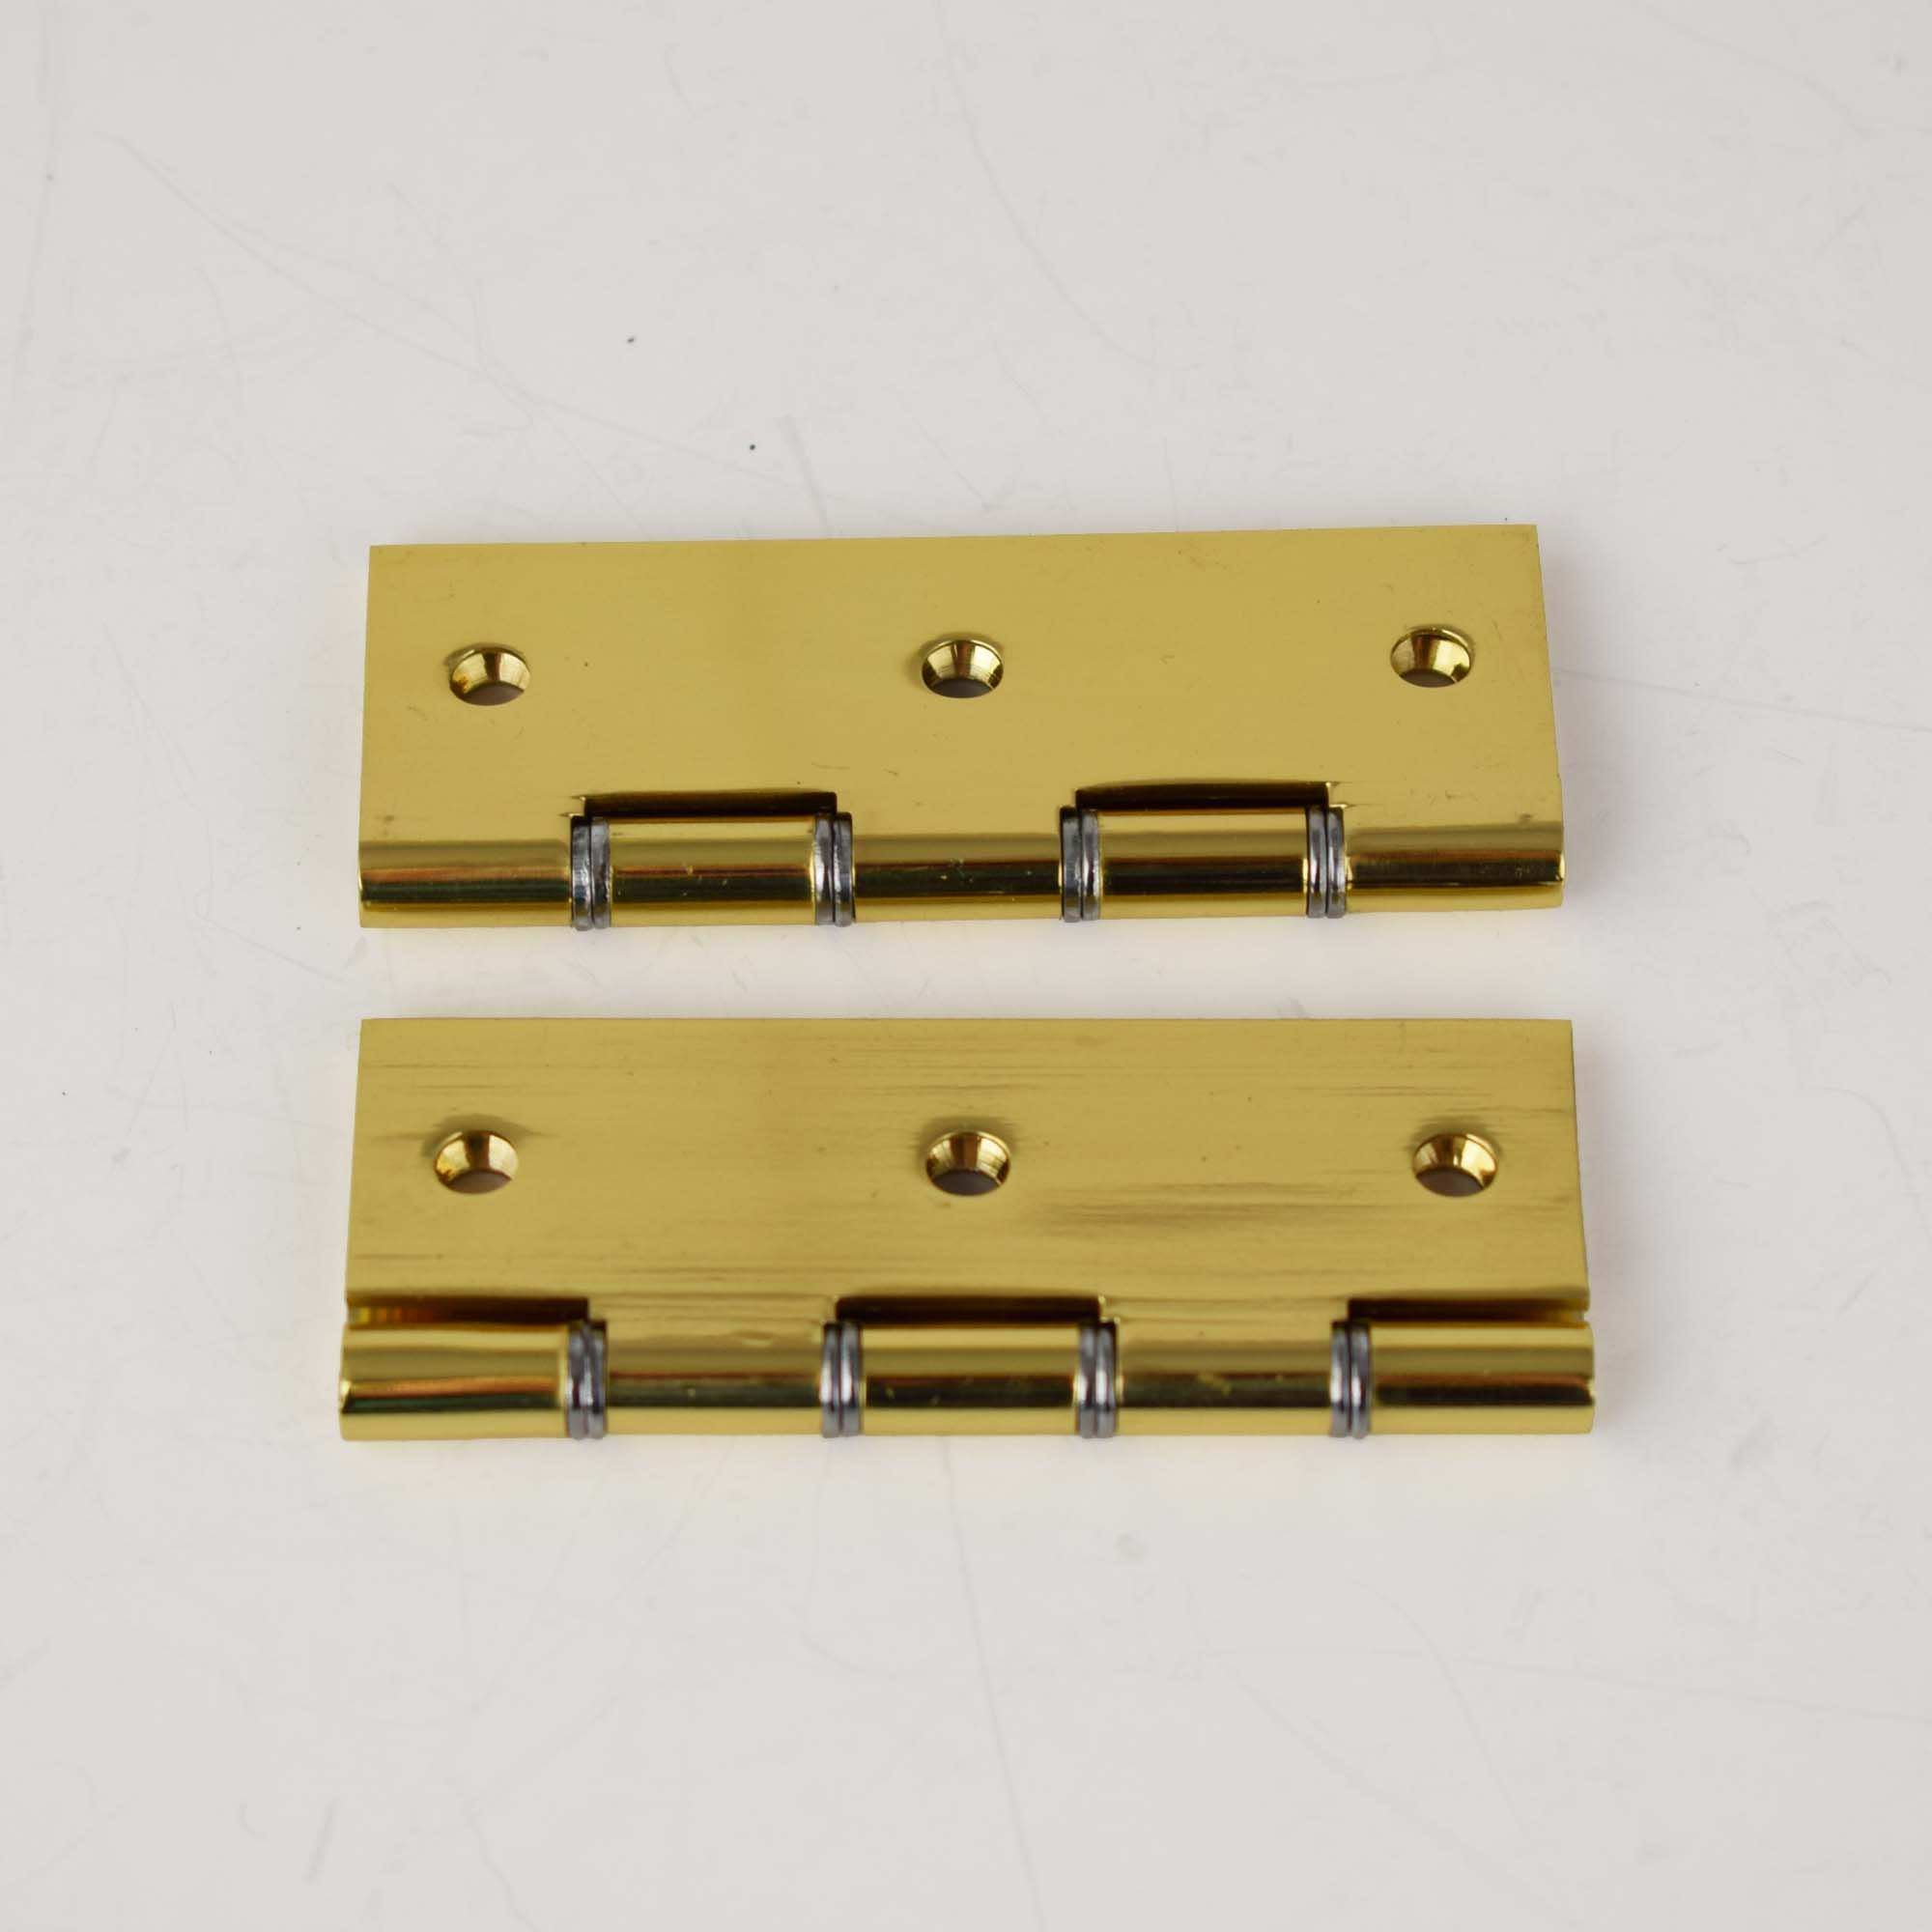 Small Brass Cabinet Hinges - Pair - Proper Copper Design